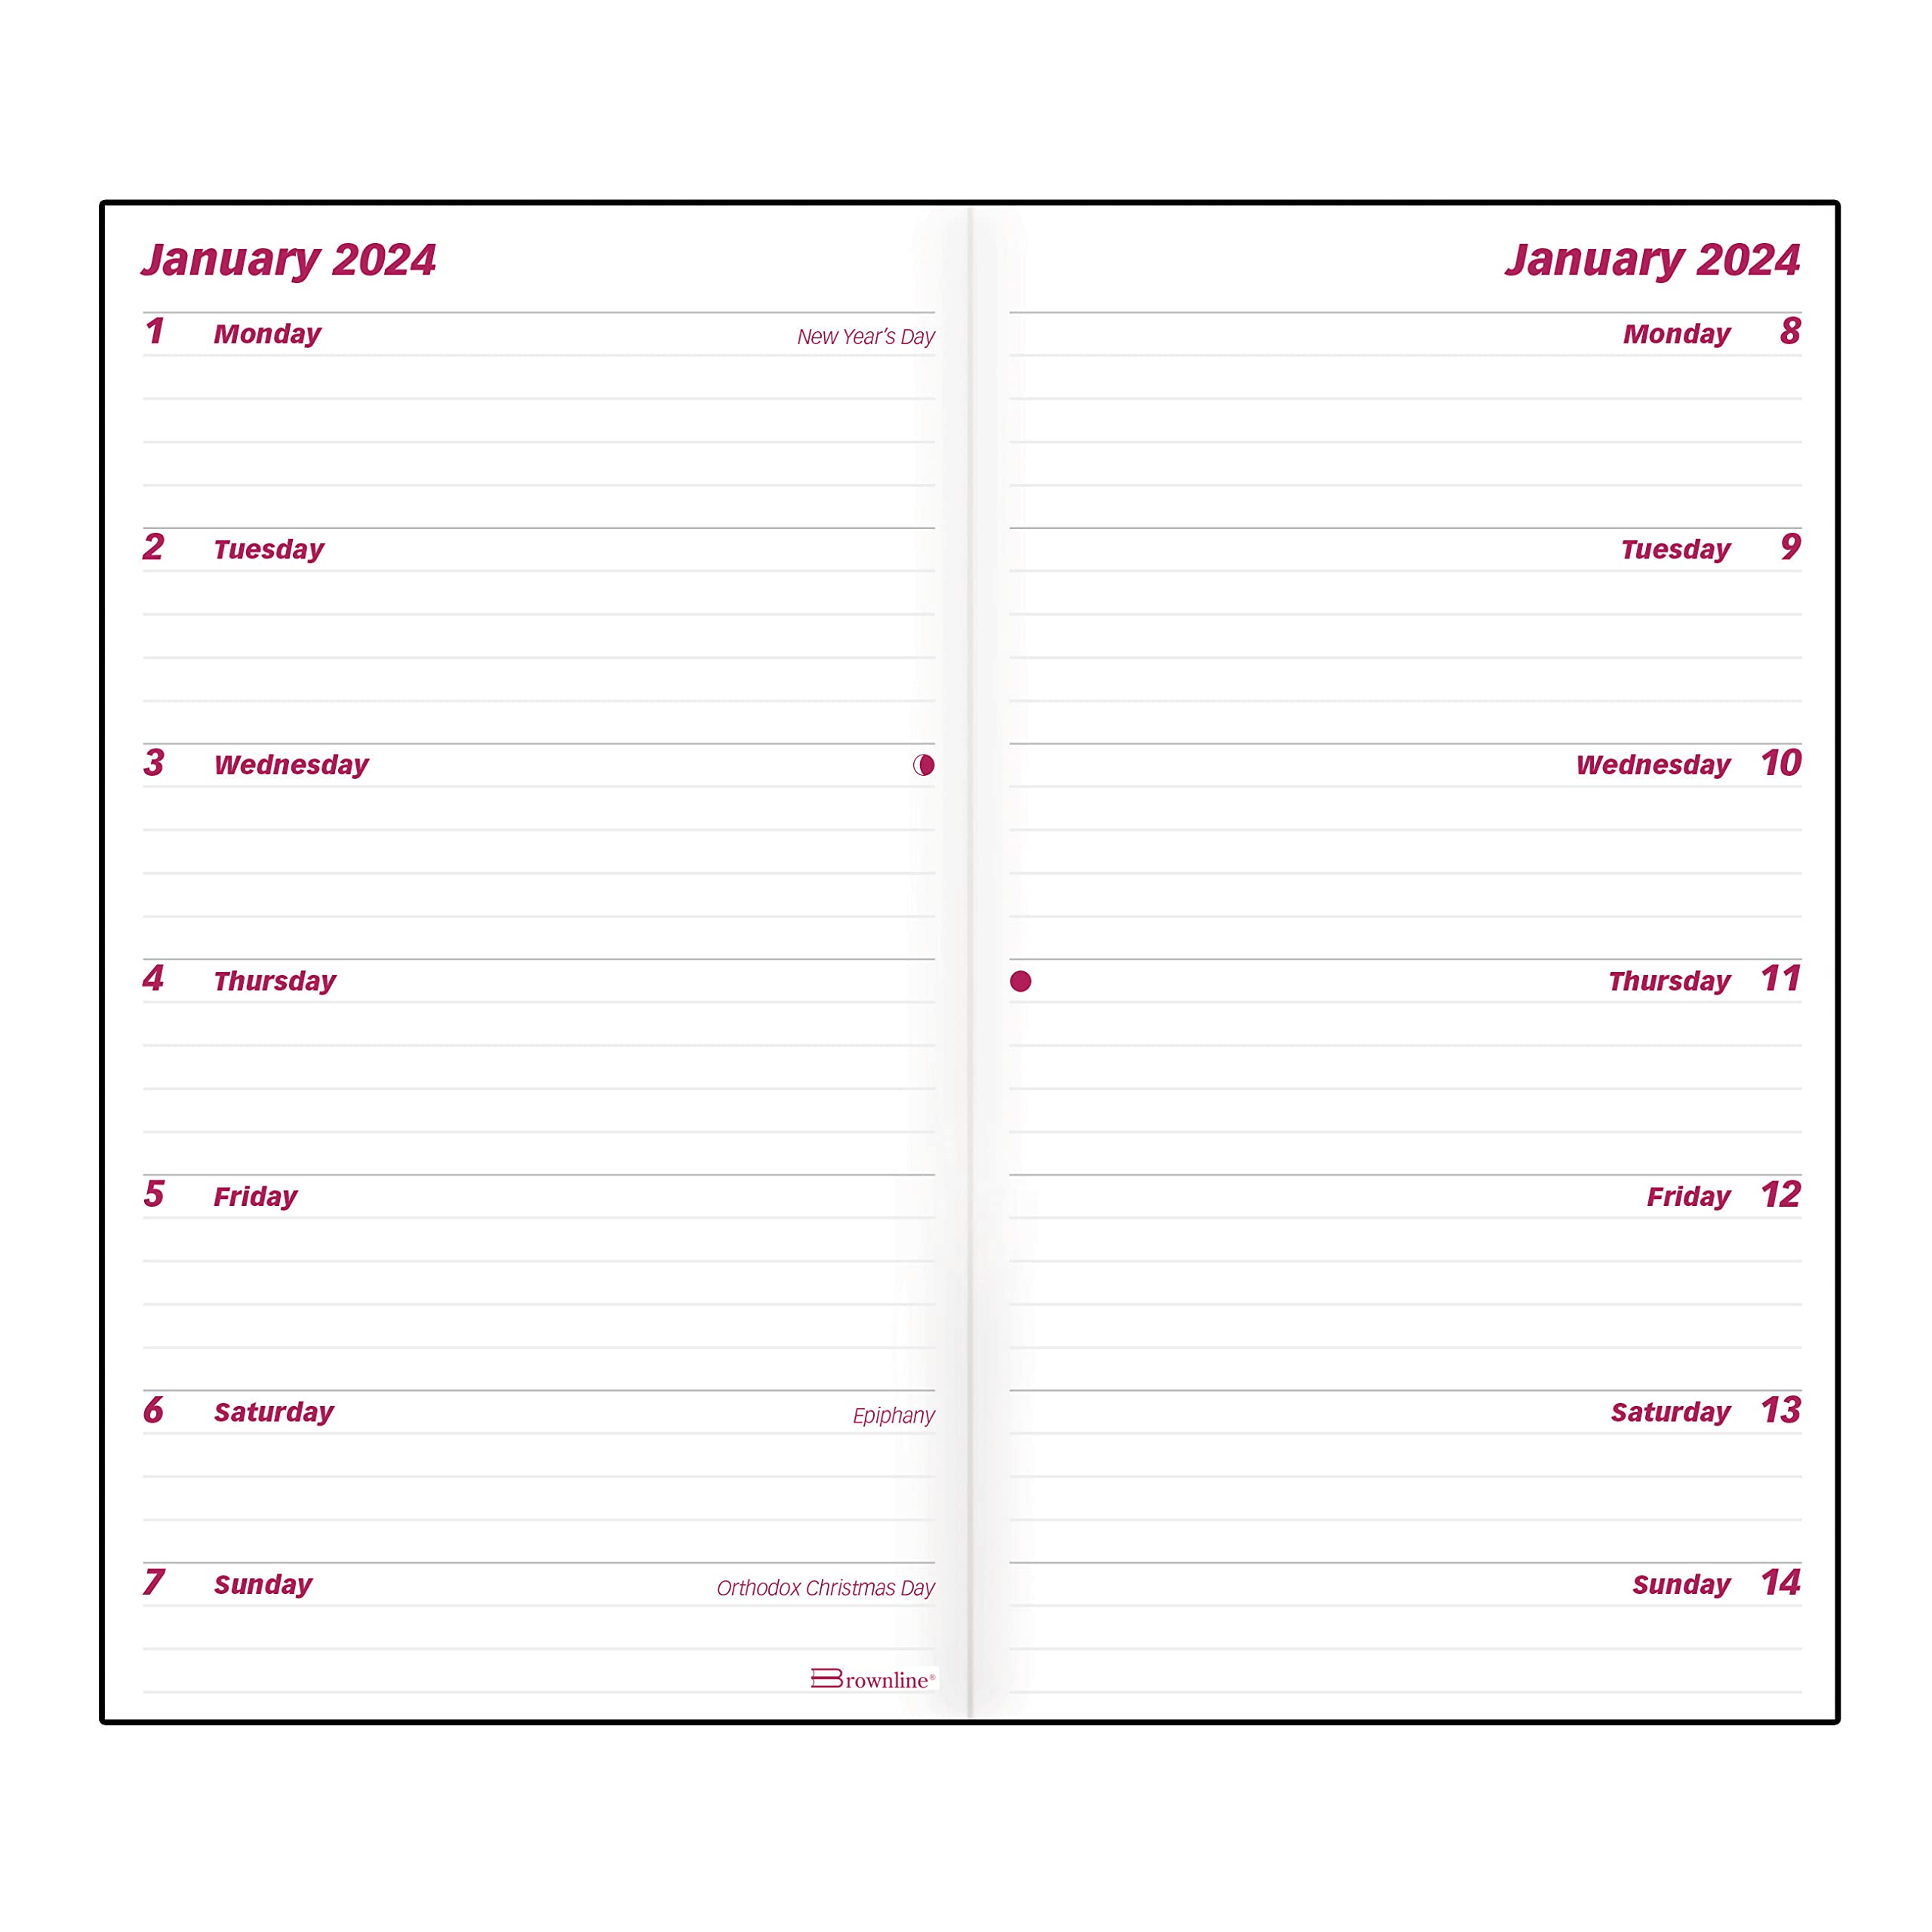 Brownline 2024 Essential Two-Week Pocket Planner, 12 Months, January to December, Stitched Binding, 6" x 3.5", Black (C5626.81Z-24)